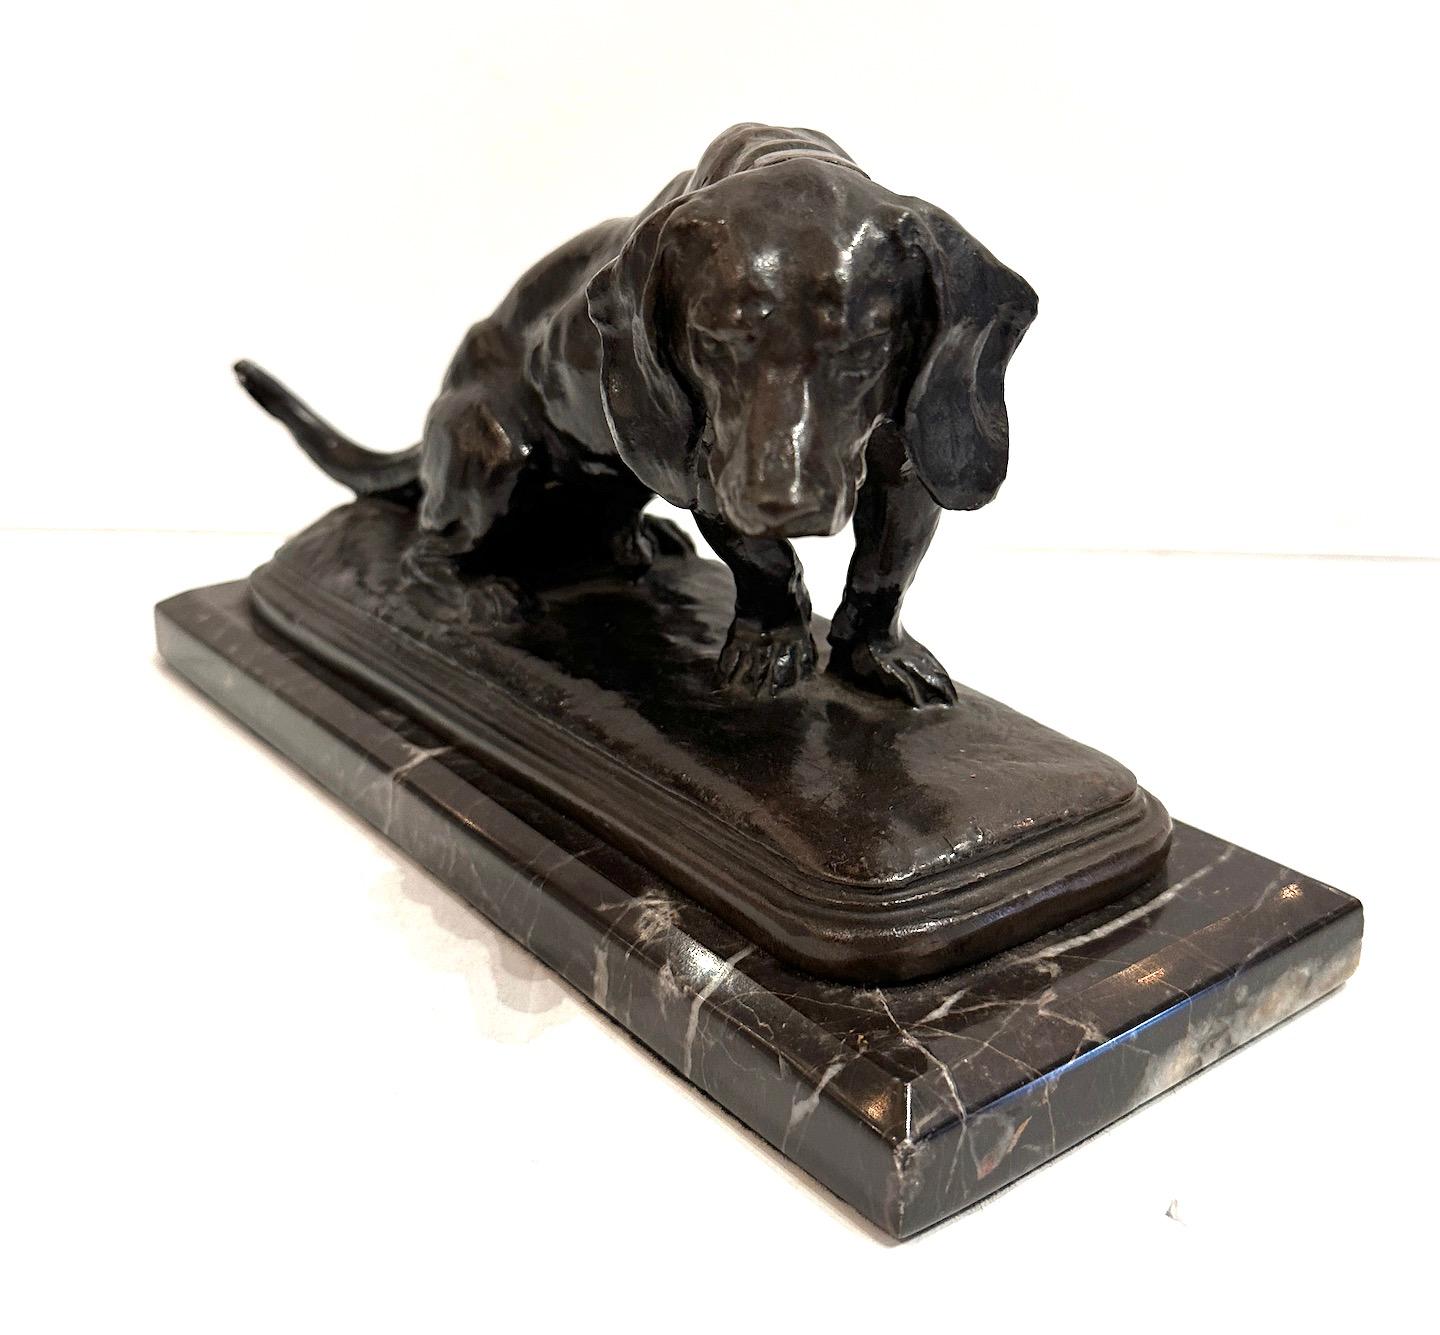 A bronze hound sculpture on marble based.  
Signed by French animalier sculptor Antoine-Louis Barye 1795-1875.
